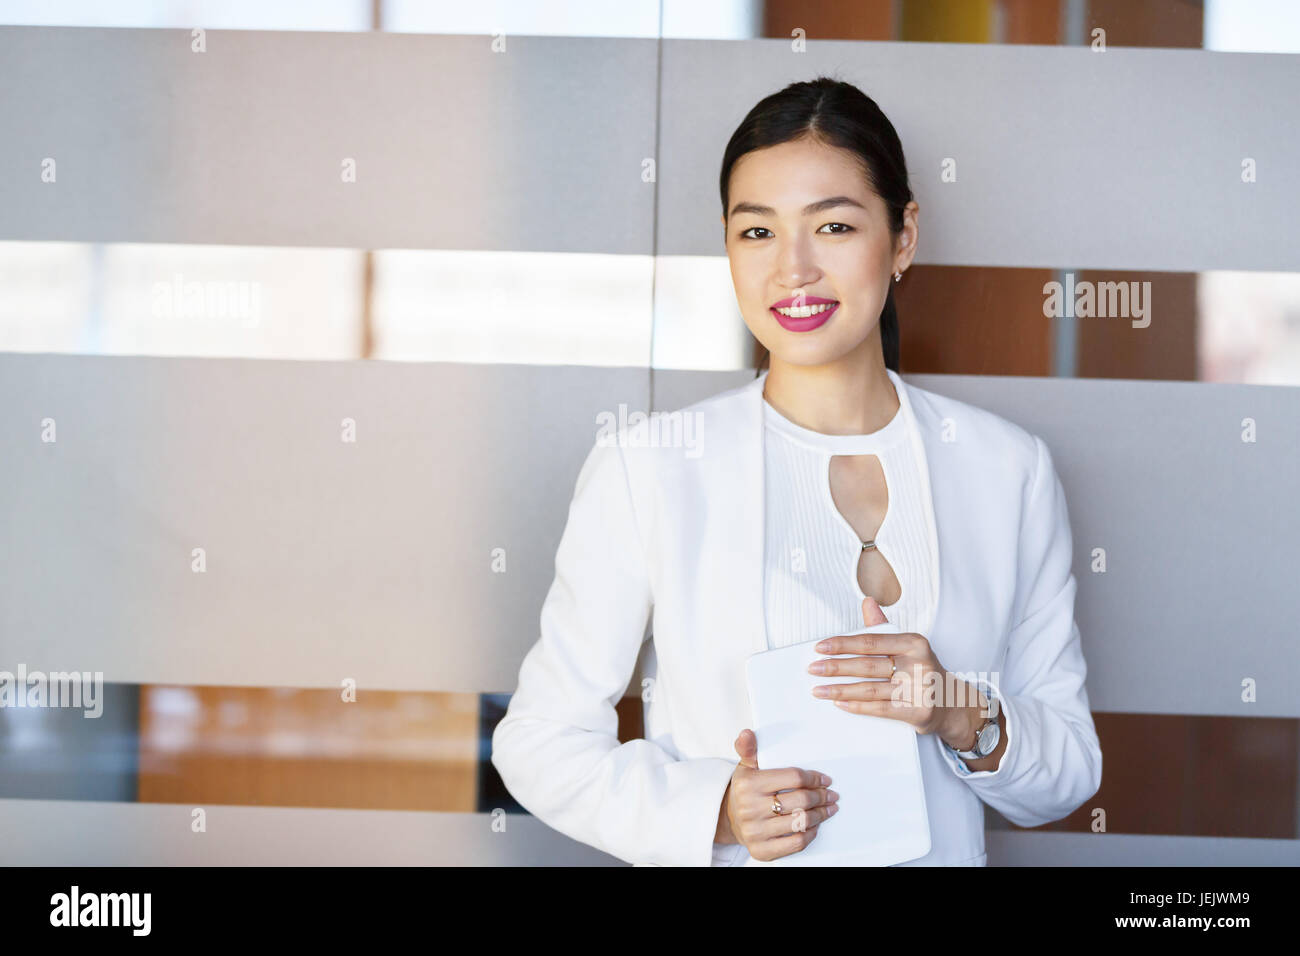 Asian young woman with tablet at office Banque D'Images